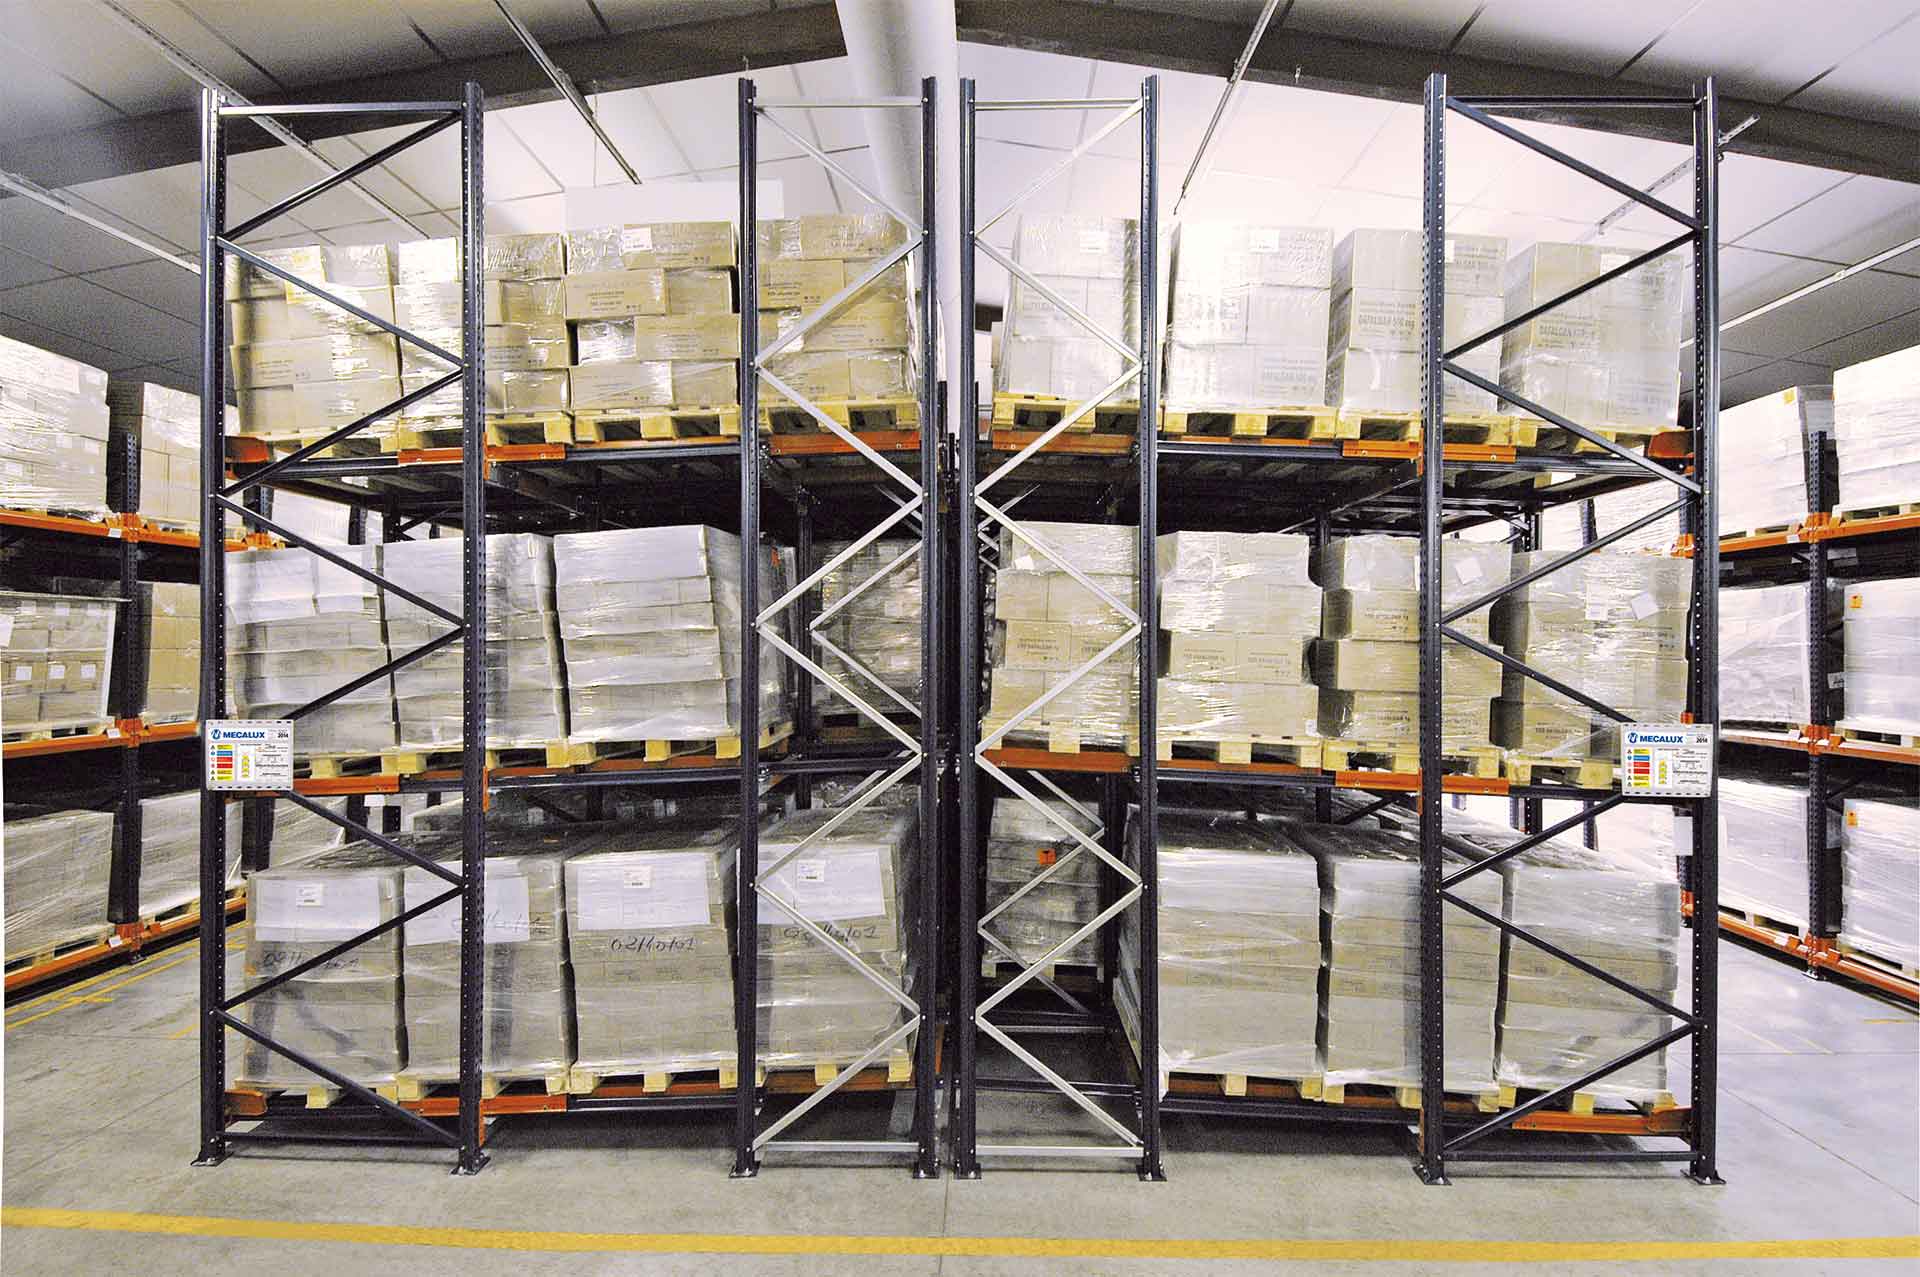  Push-back racks installed in a warehouse as a flow racking system